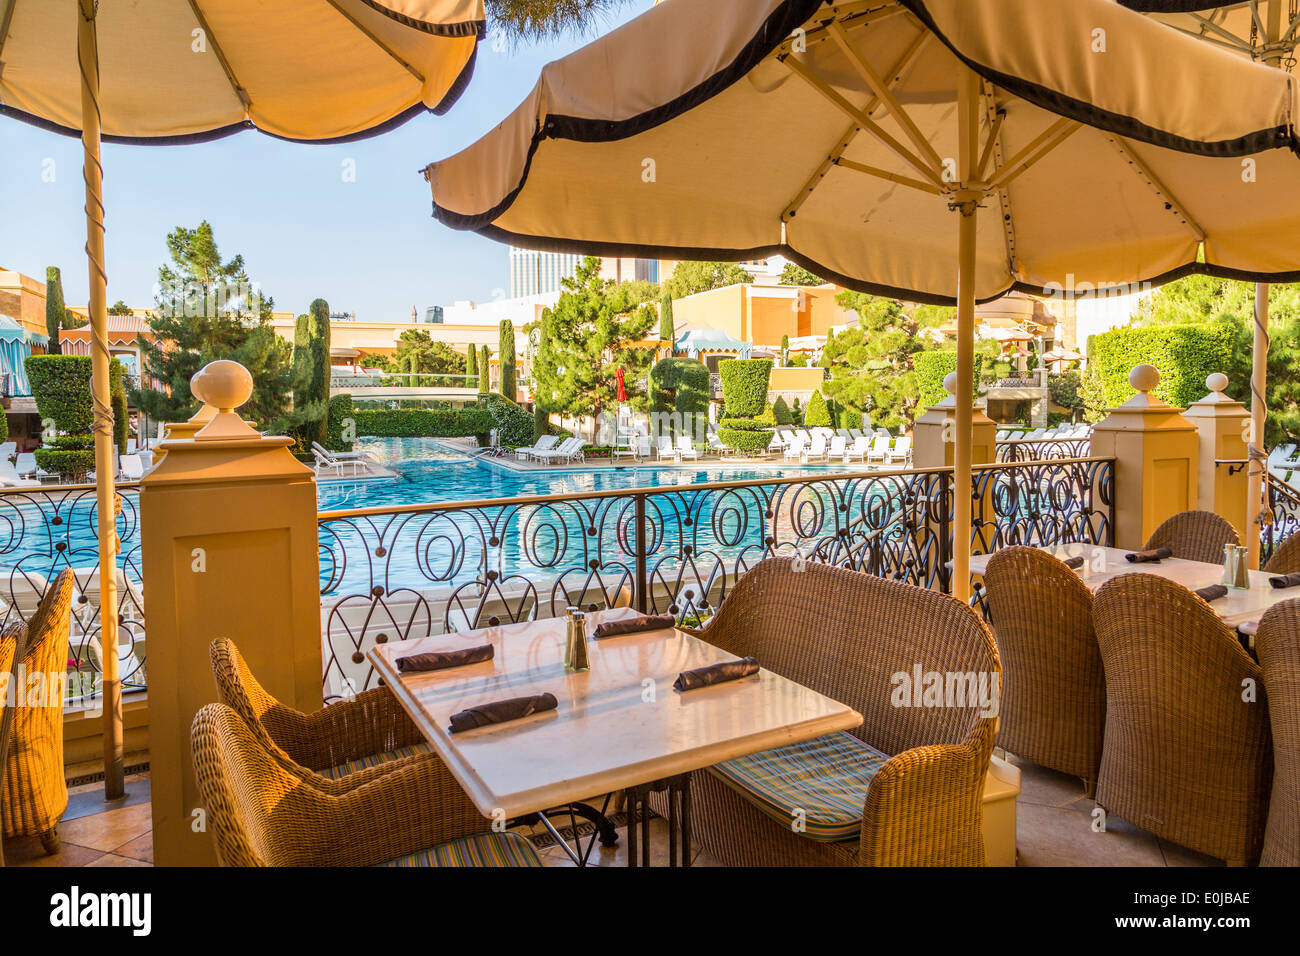 Terrace Pointe Cafe overlooking the swimming pool at the Wynn Hotel Las Vegas Nevada USA Stock Photo